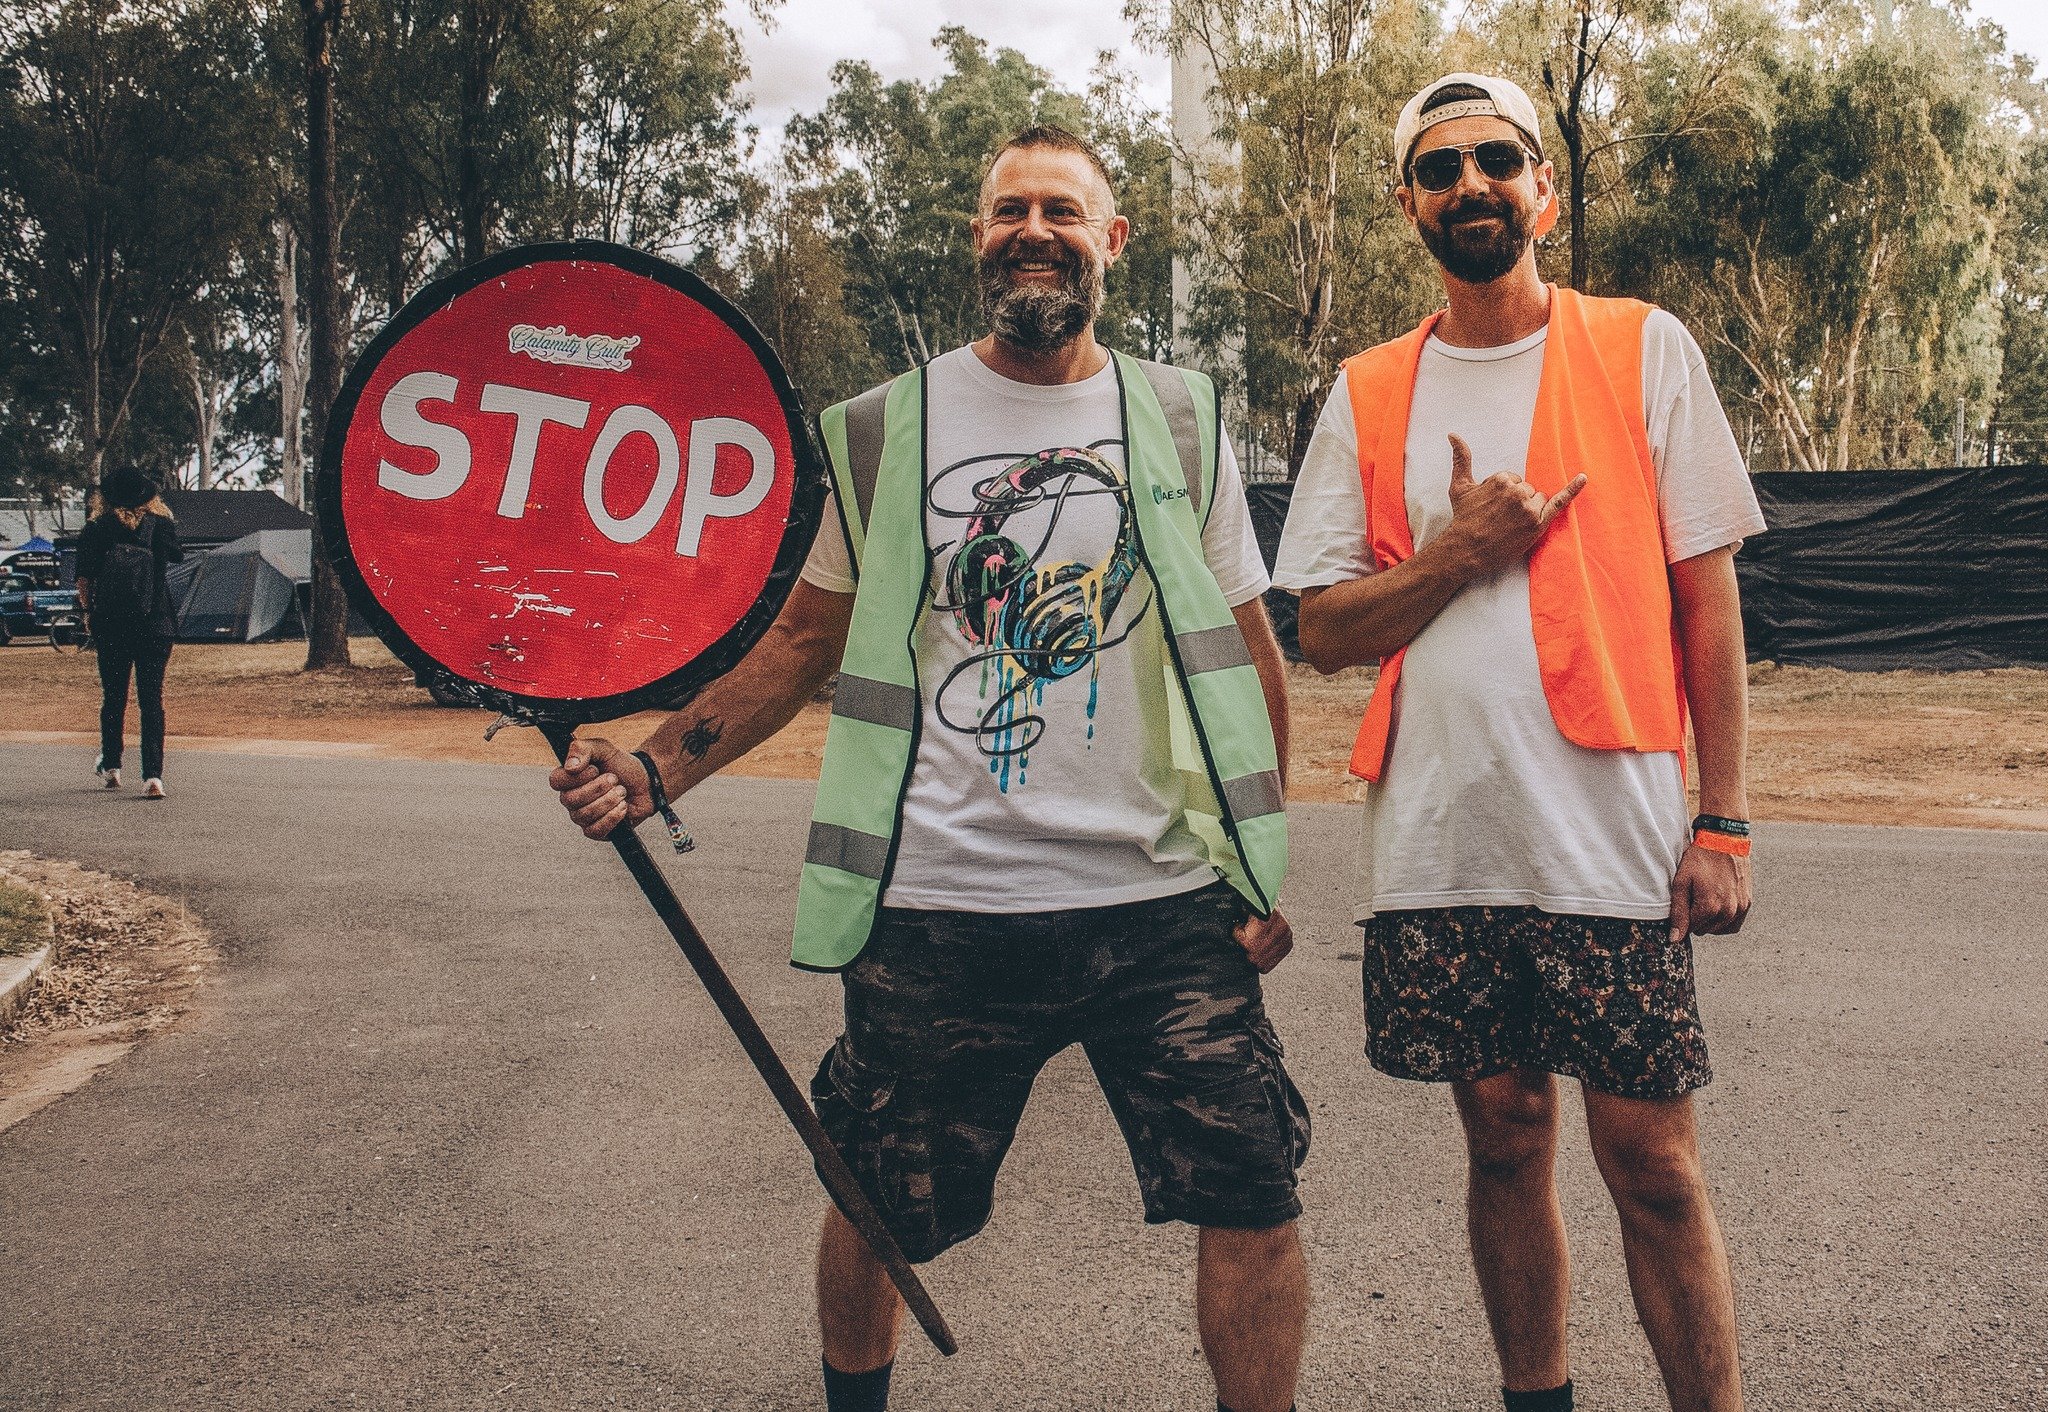 🛑 Safety checkpoint : beware of scammers and fake tickets!

As we're now very close to the festival dates, the usual onslaught of fake and scam pages, events, ticket sellers and online streaming events is beginning. 

We want you to stay safe and so